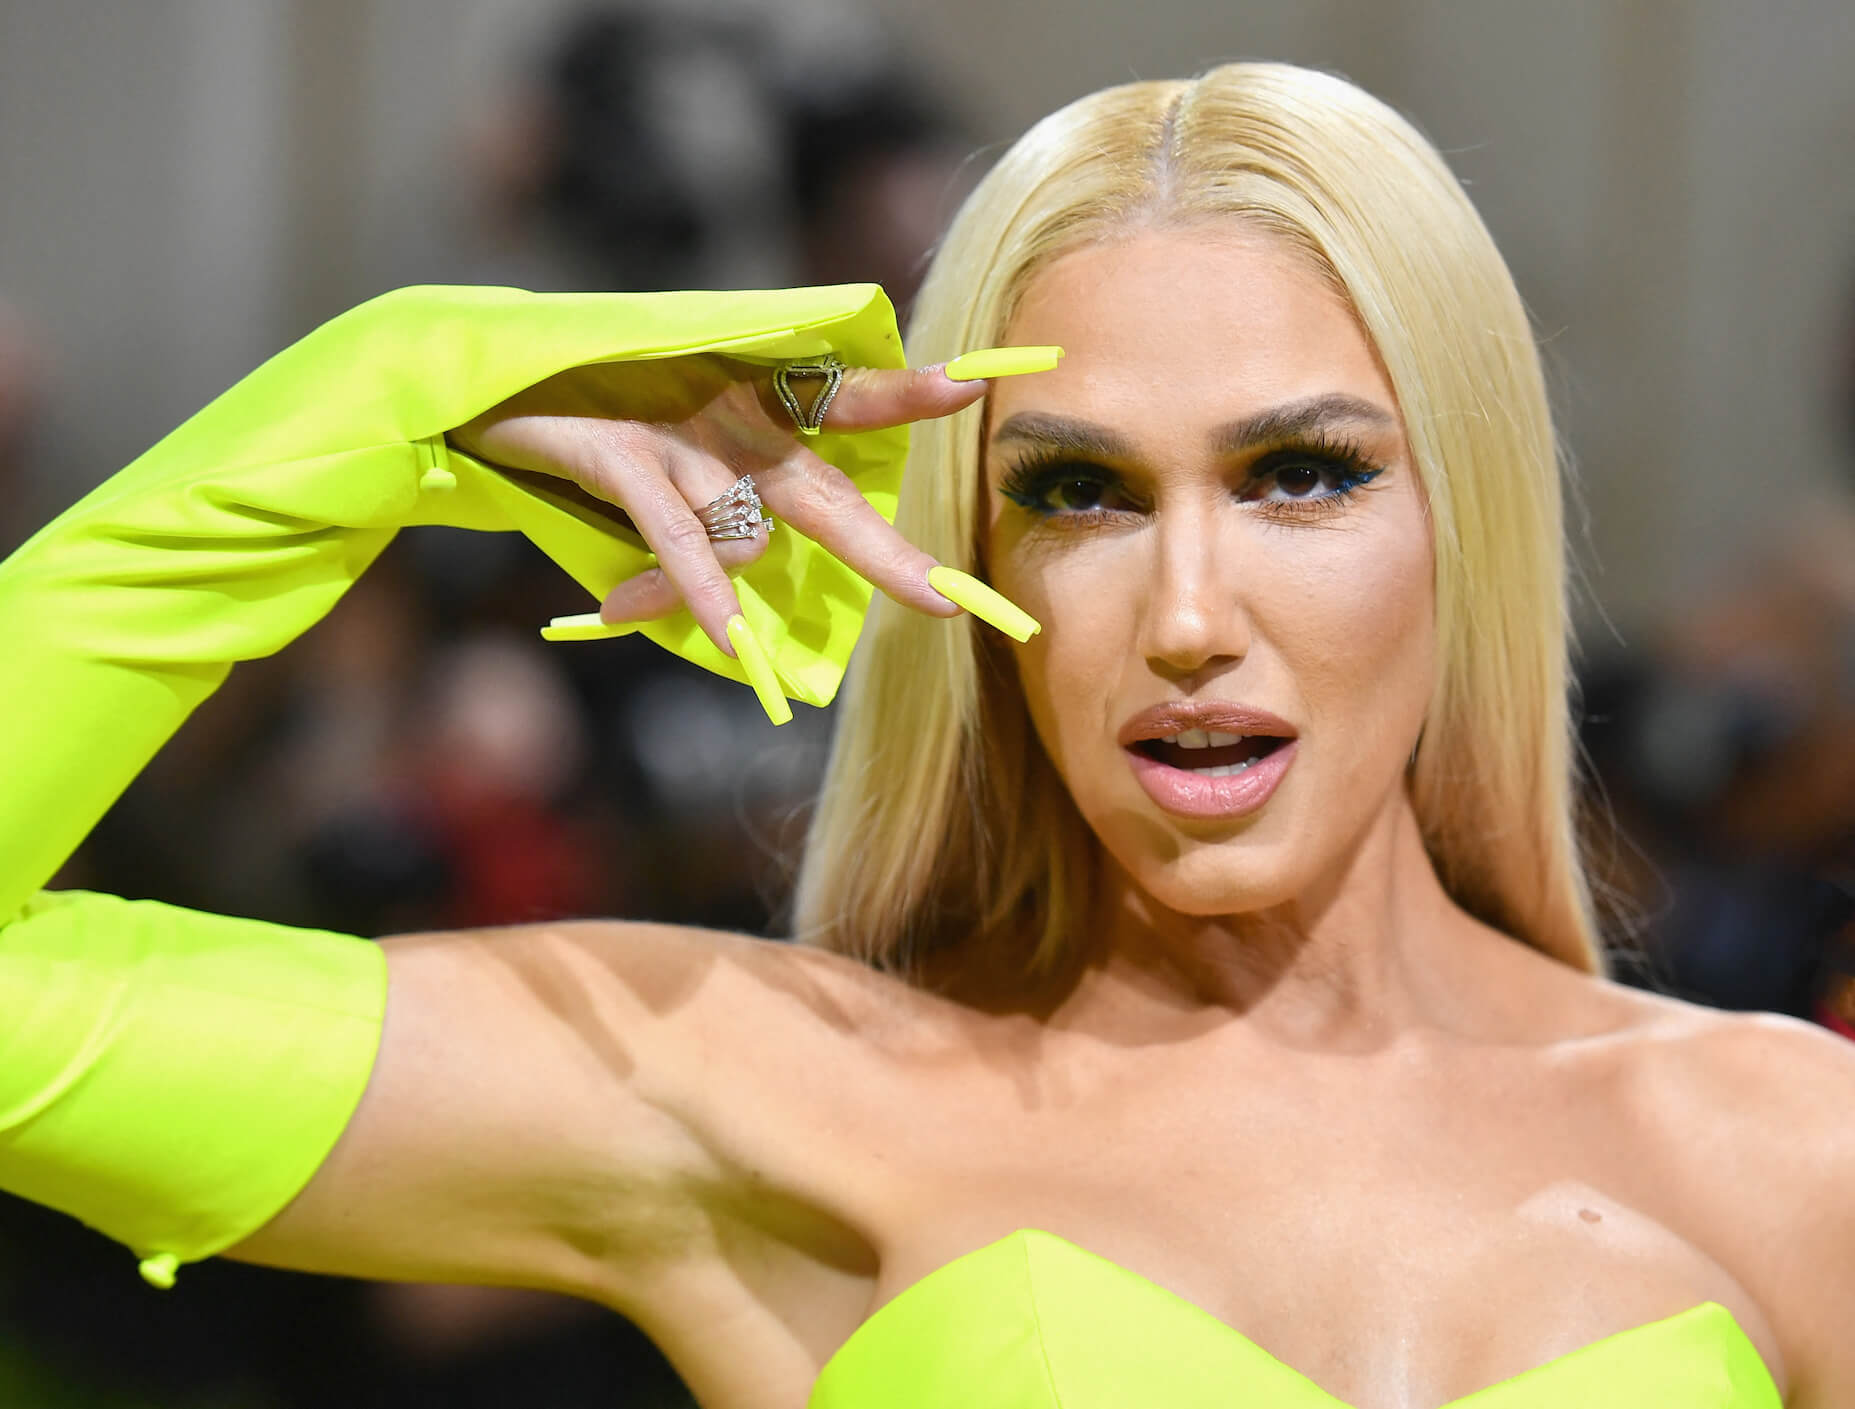 'The Voice' Season 24 coach Gwen Stefani wearing a neon yellow gown and gloves at the Met Gala in 2022